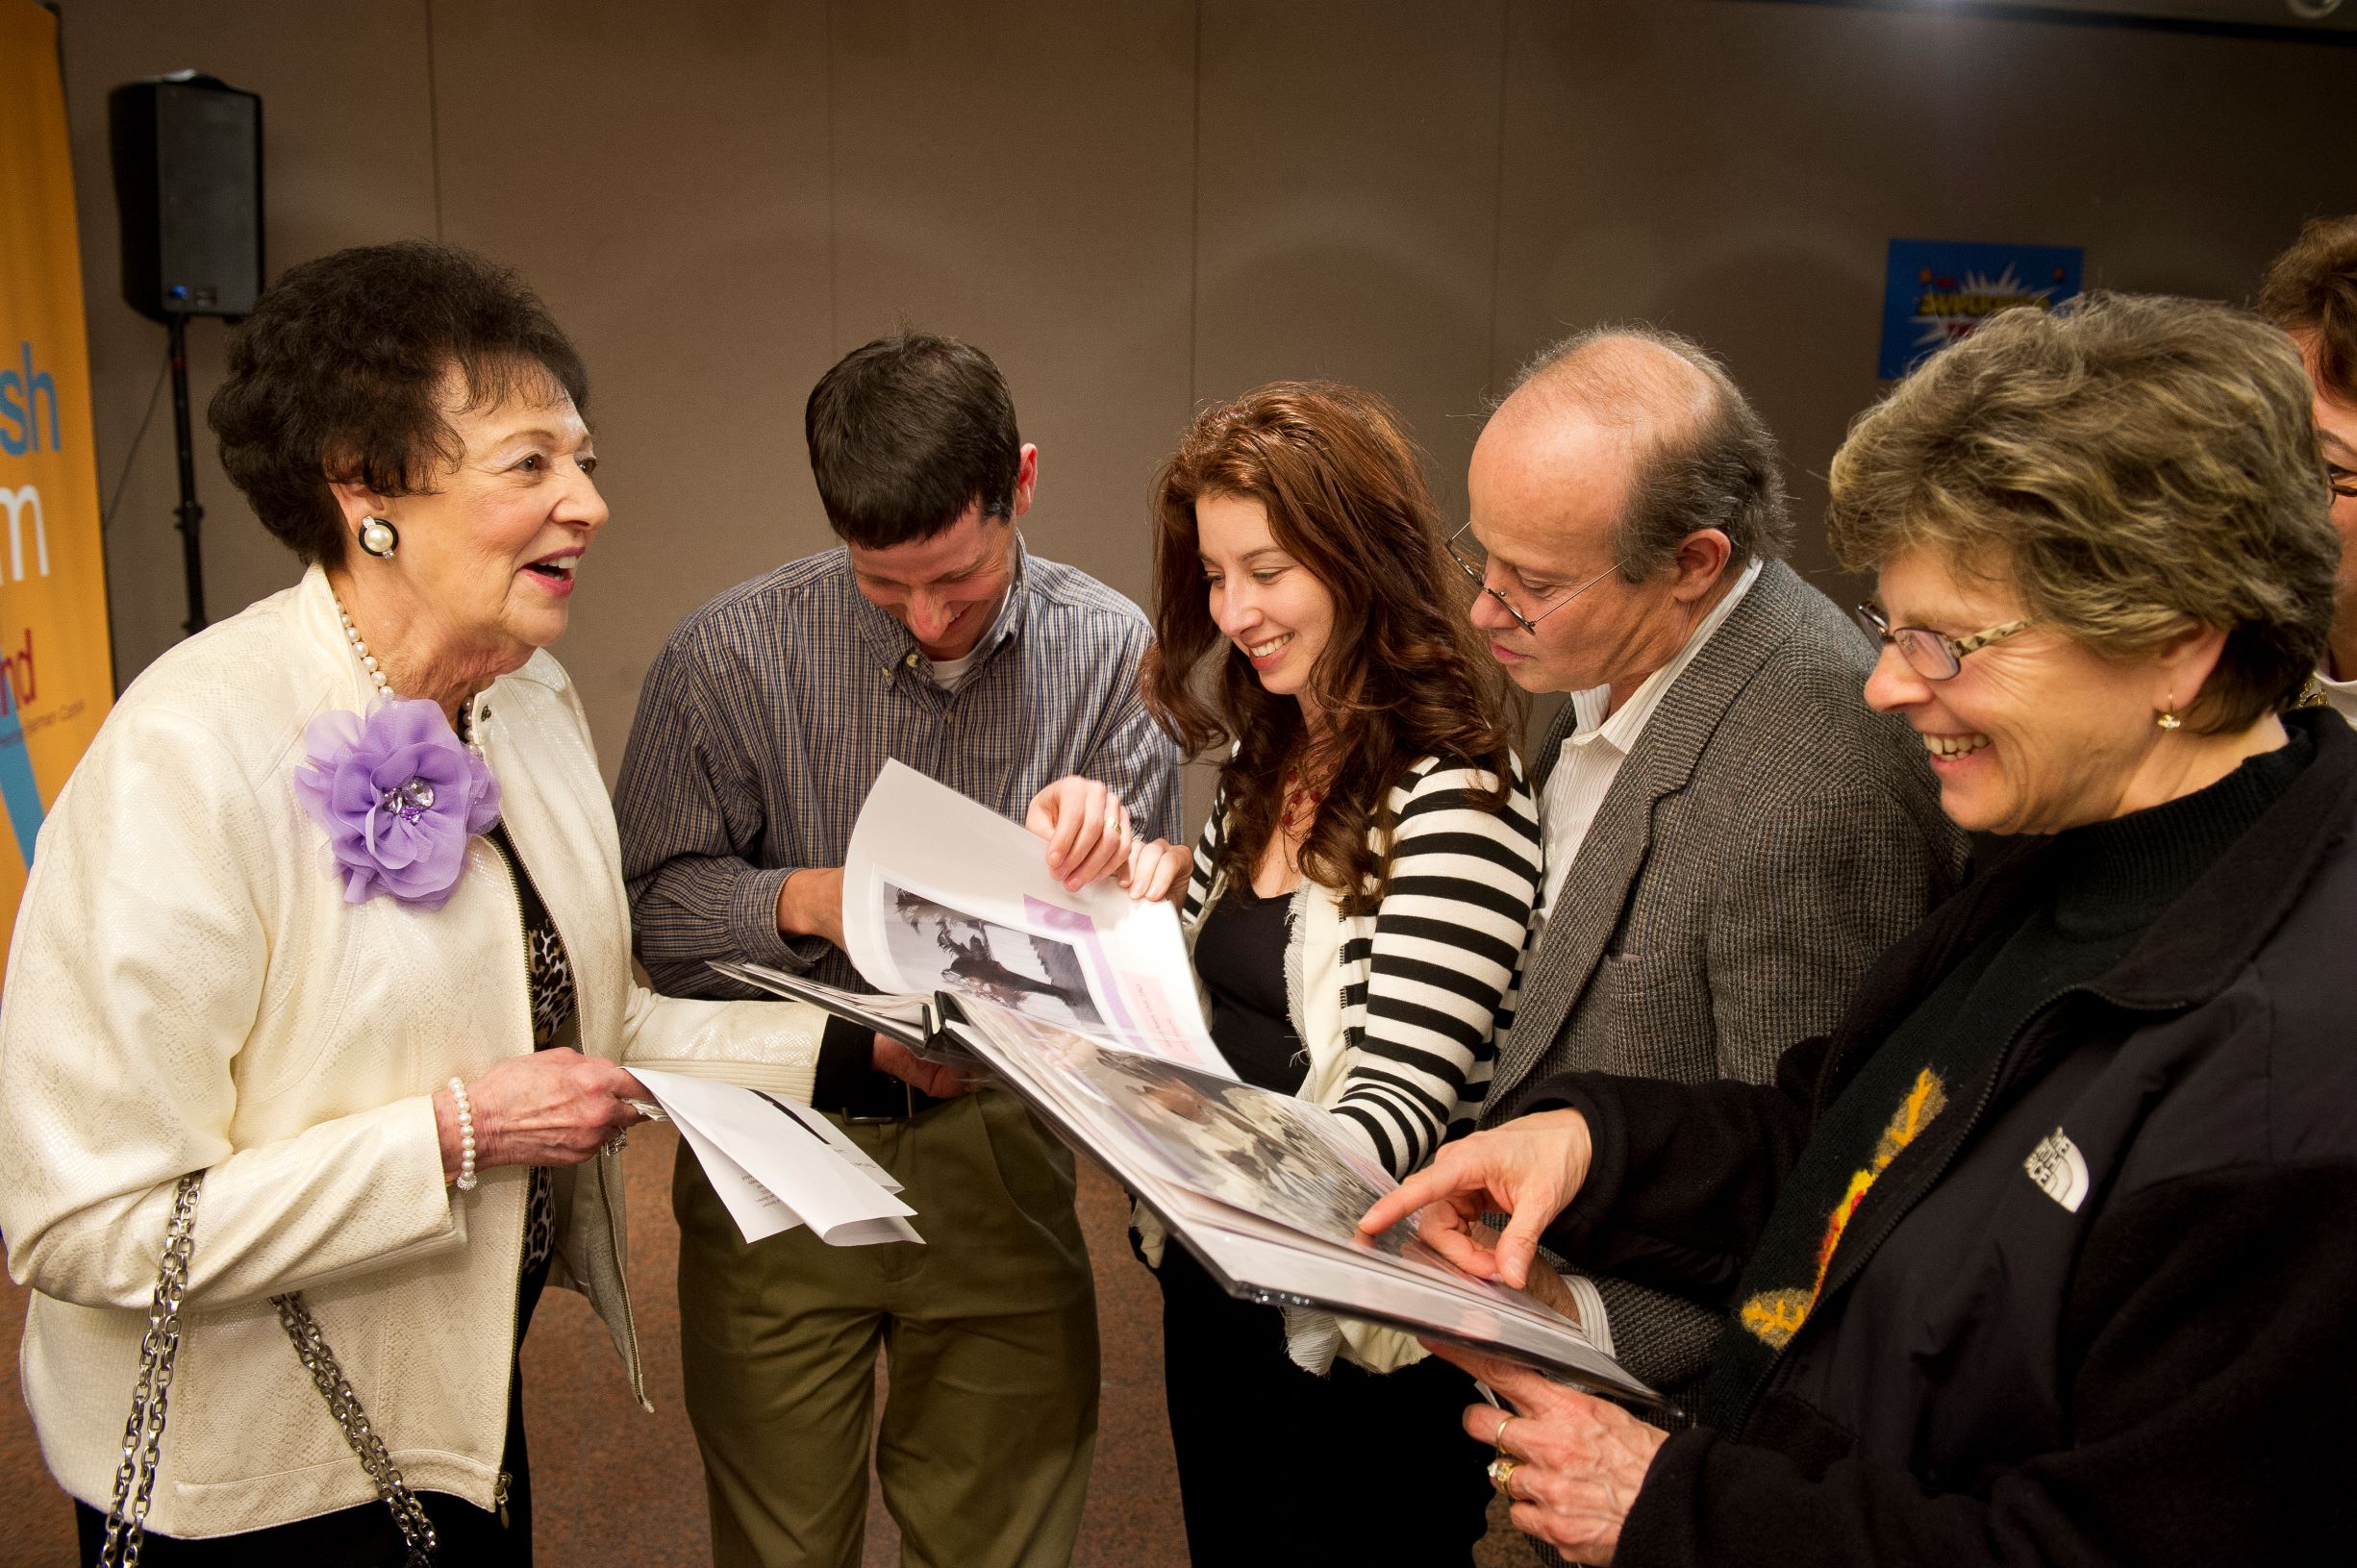 A group of people stand together talking and smiling. They look at a book filled with images. One person points to an image.